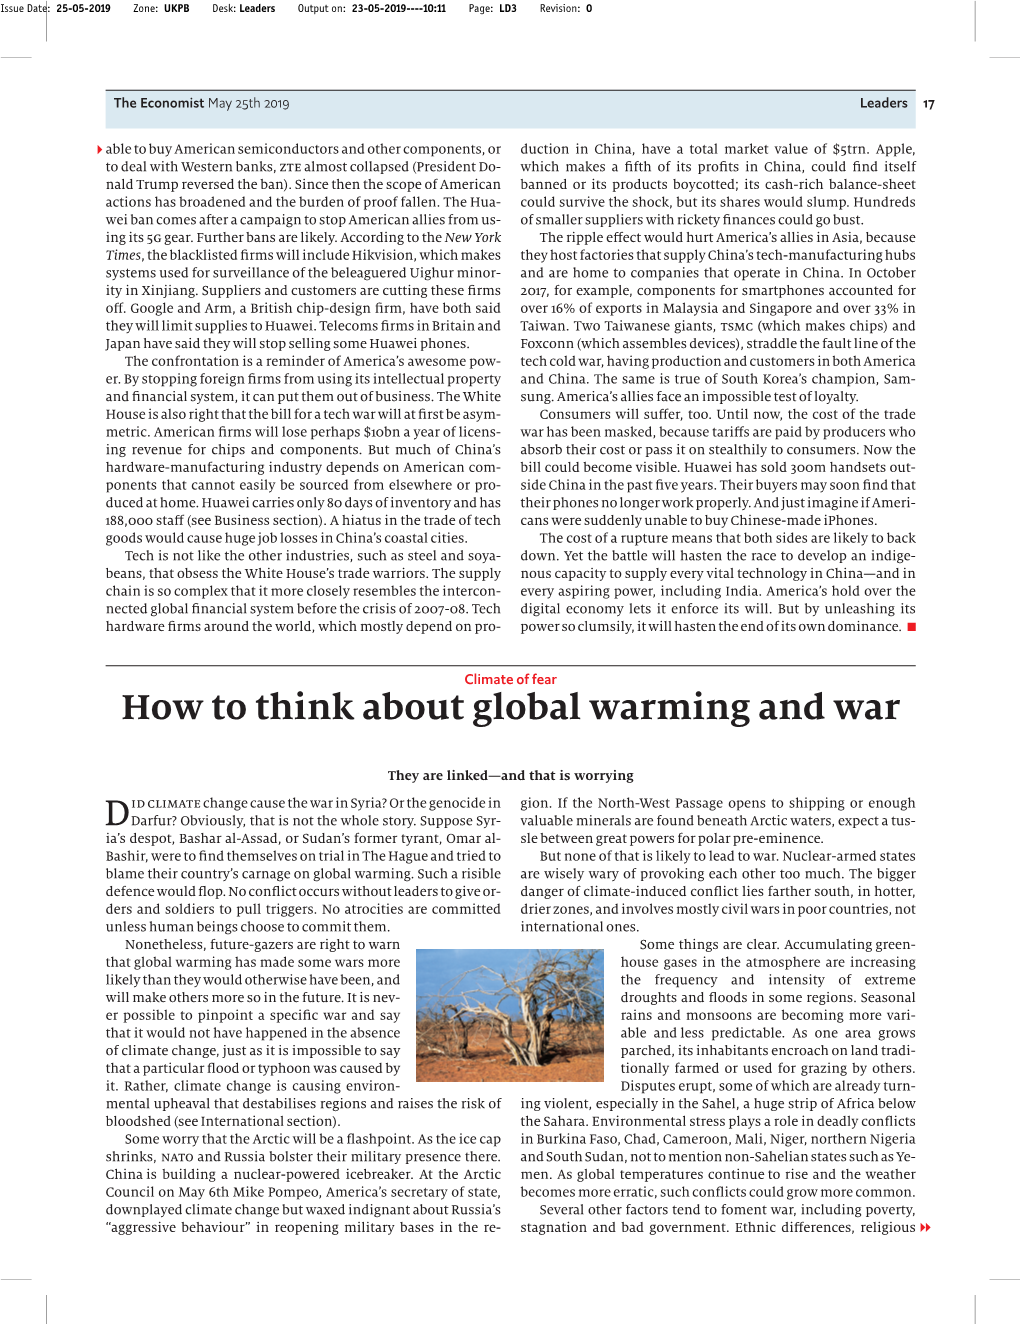 How to Think About Global Warming and War